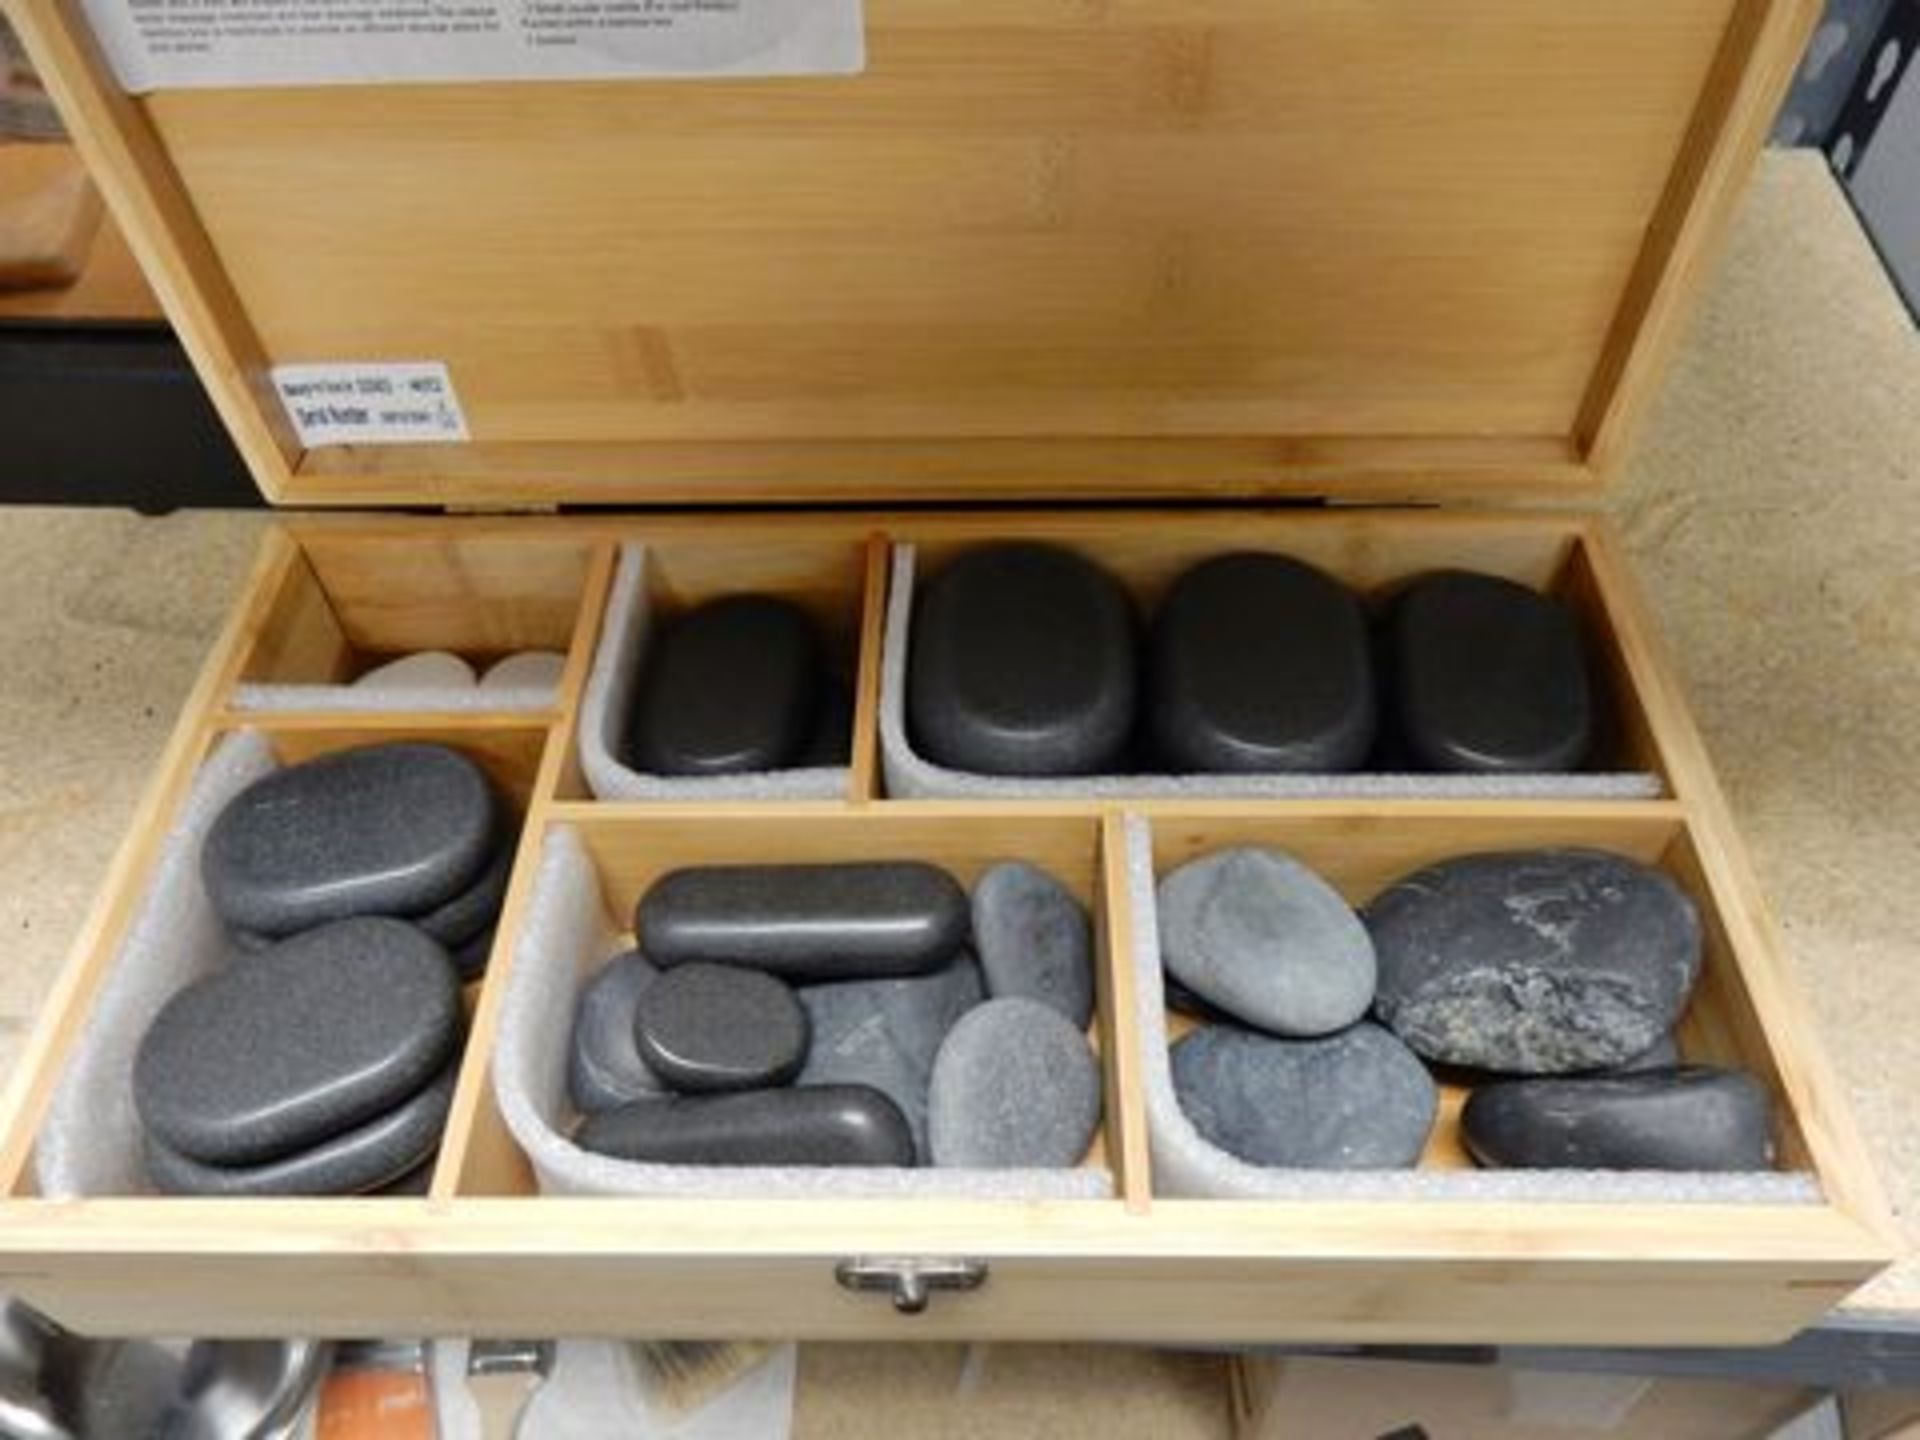 (2) 45 PC. HOT STONE SETS W/WOOD BOXES & (2) CROCK POT-STYLE WARMERS